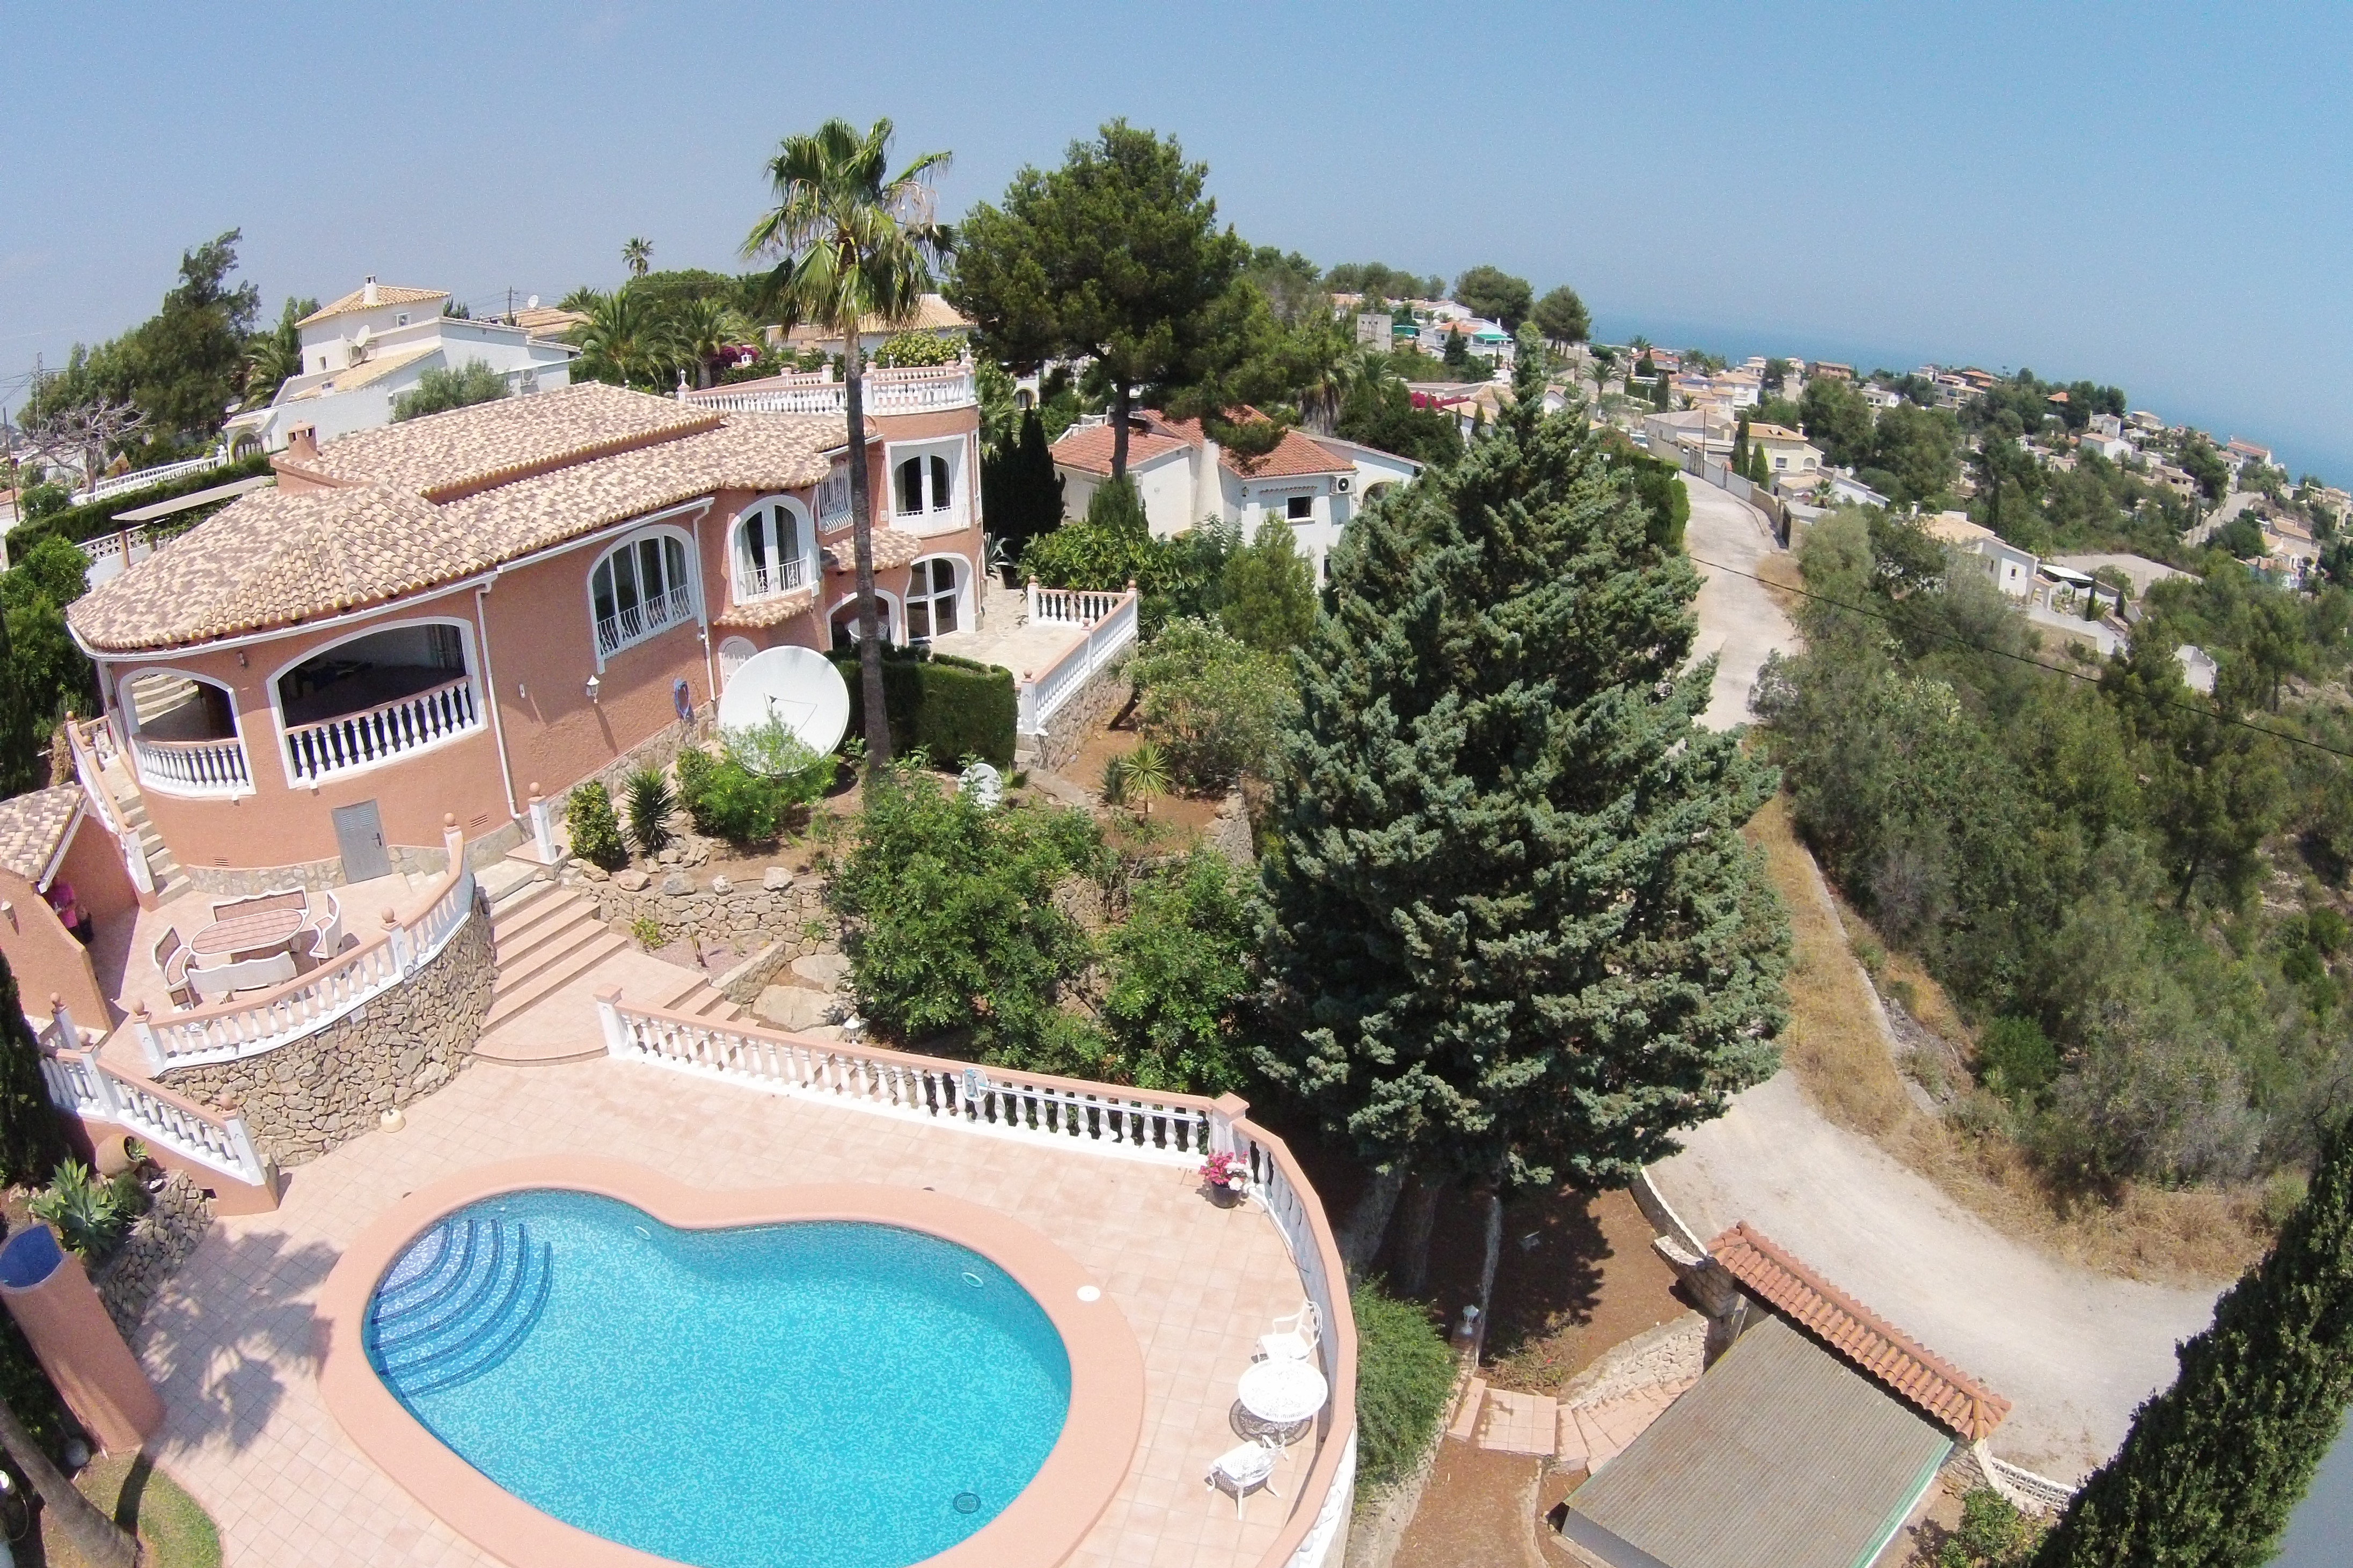 For sale: Dénia, Alicante - Four bedroom villa with separate apartment, sea and mountain views, pool and garden